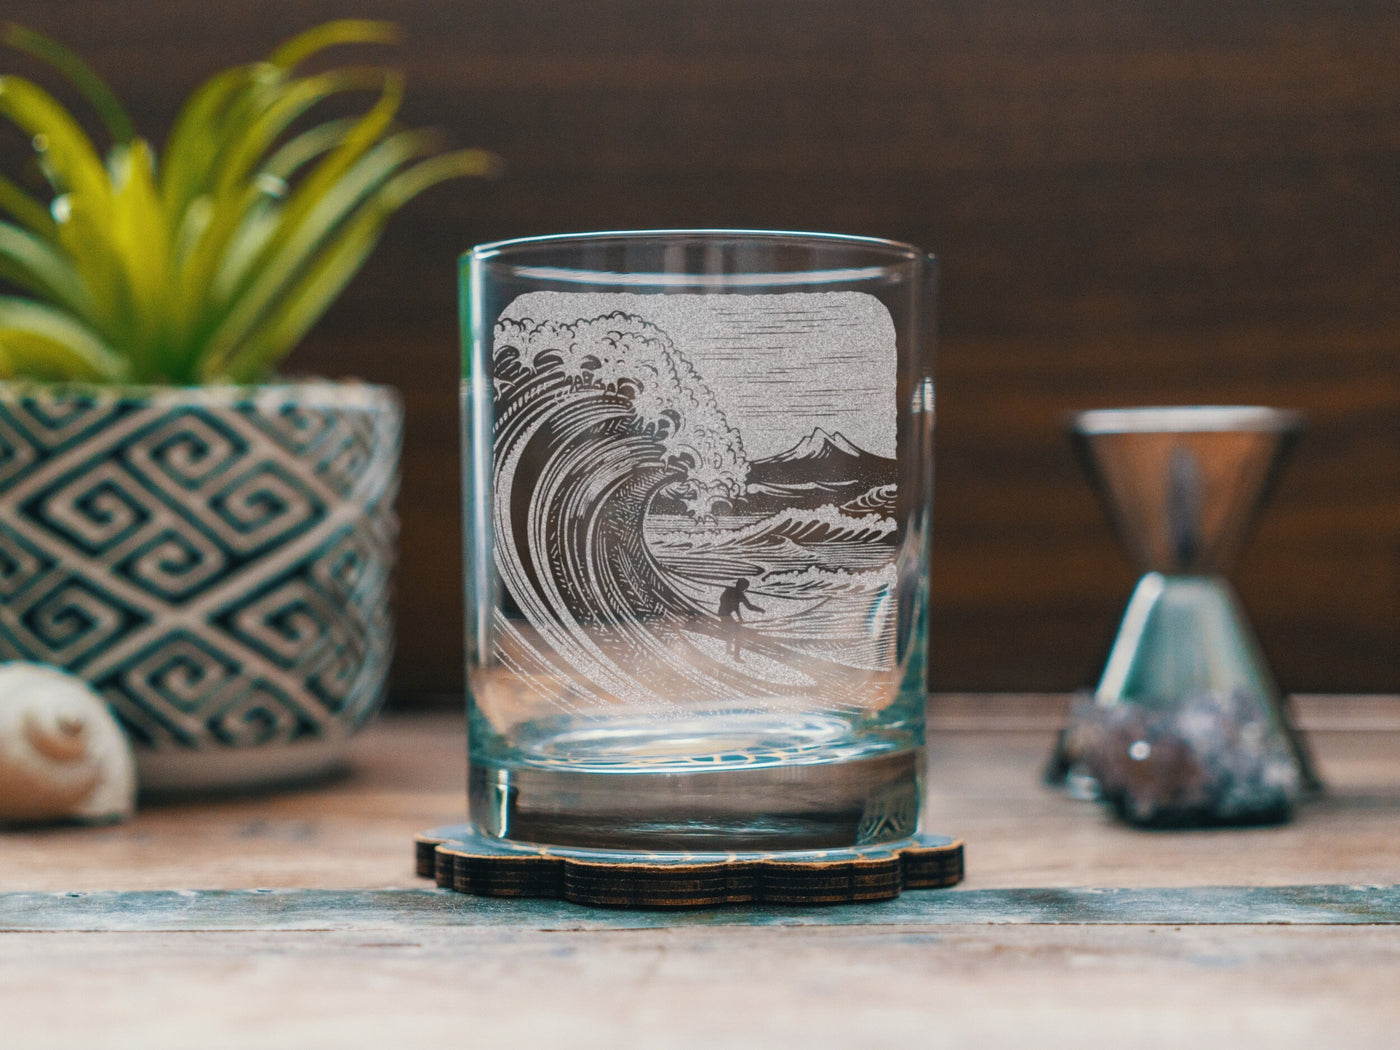 Surfing Scene Glasses | Personalized etched beer, whiskey, wine & cocktail glassware. Beach Coast Lifestyle gift, Tropical Summer Vibes.